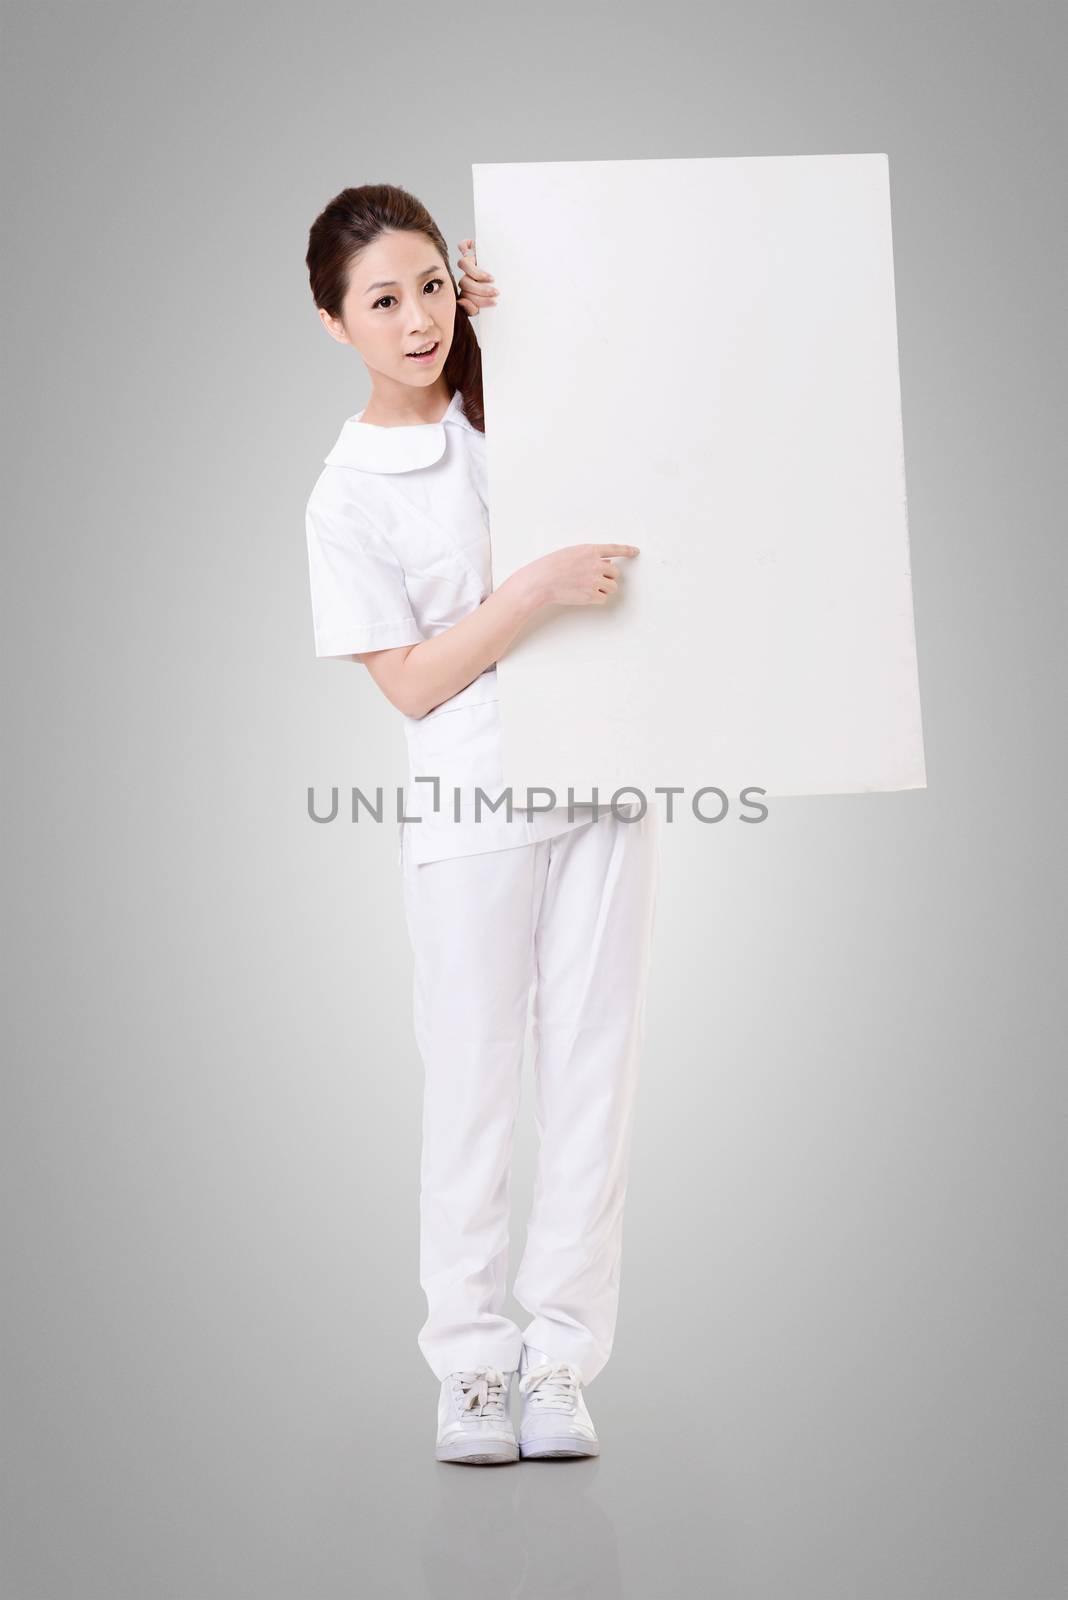 Smiling Asian nurse holding blank board, woman portrait isolated.